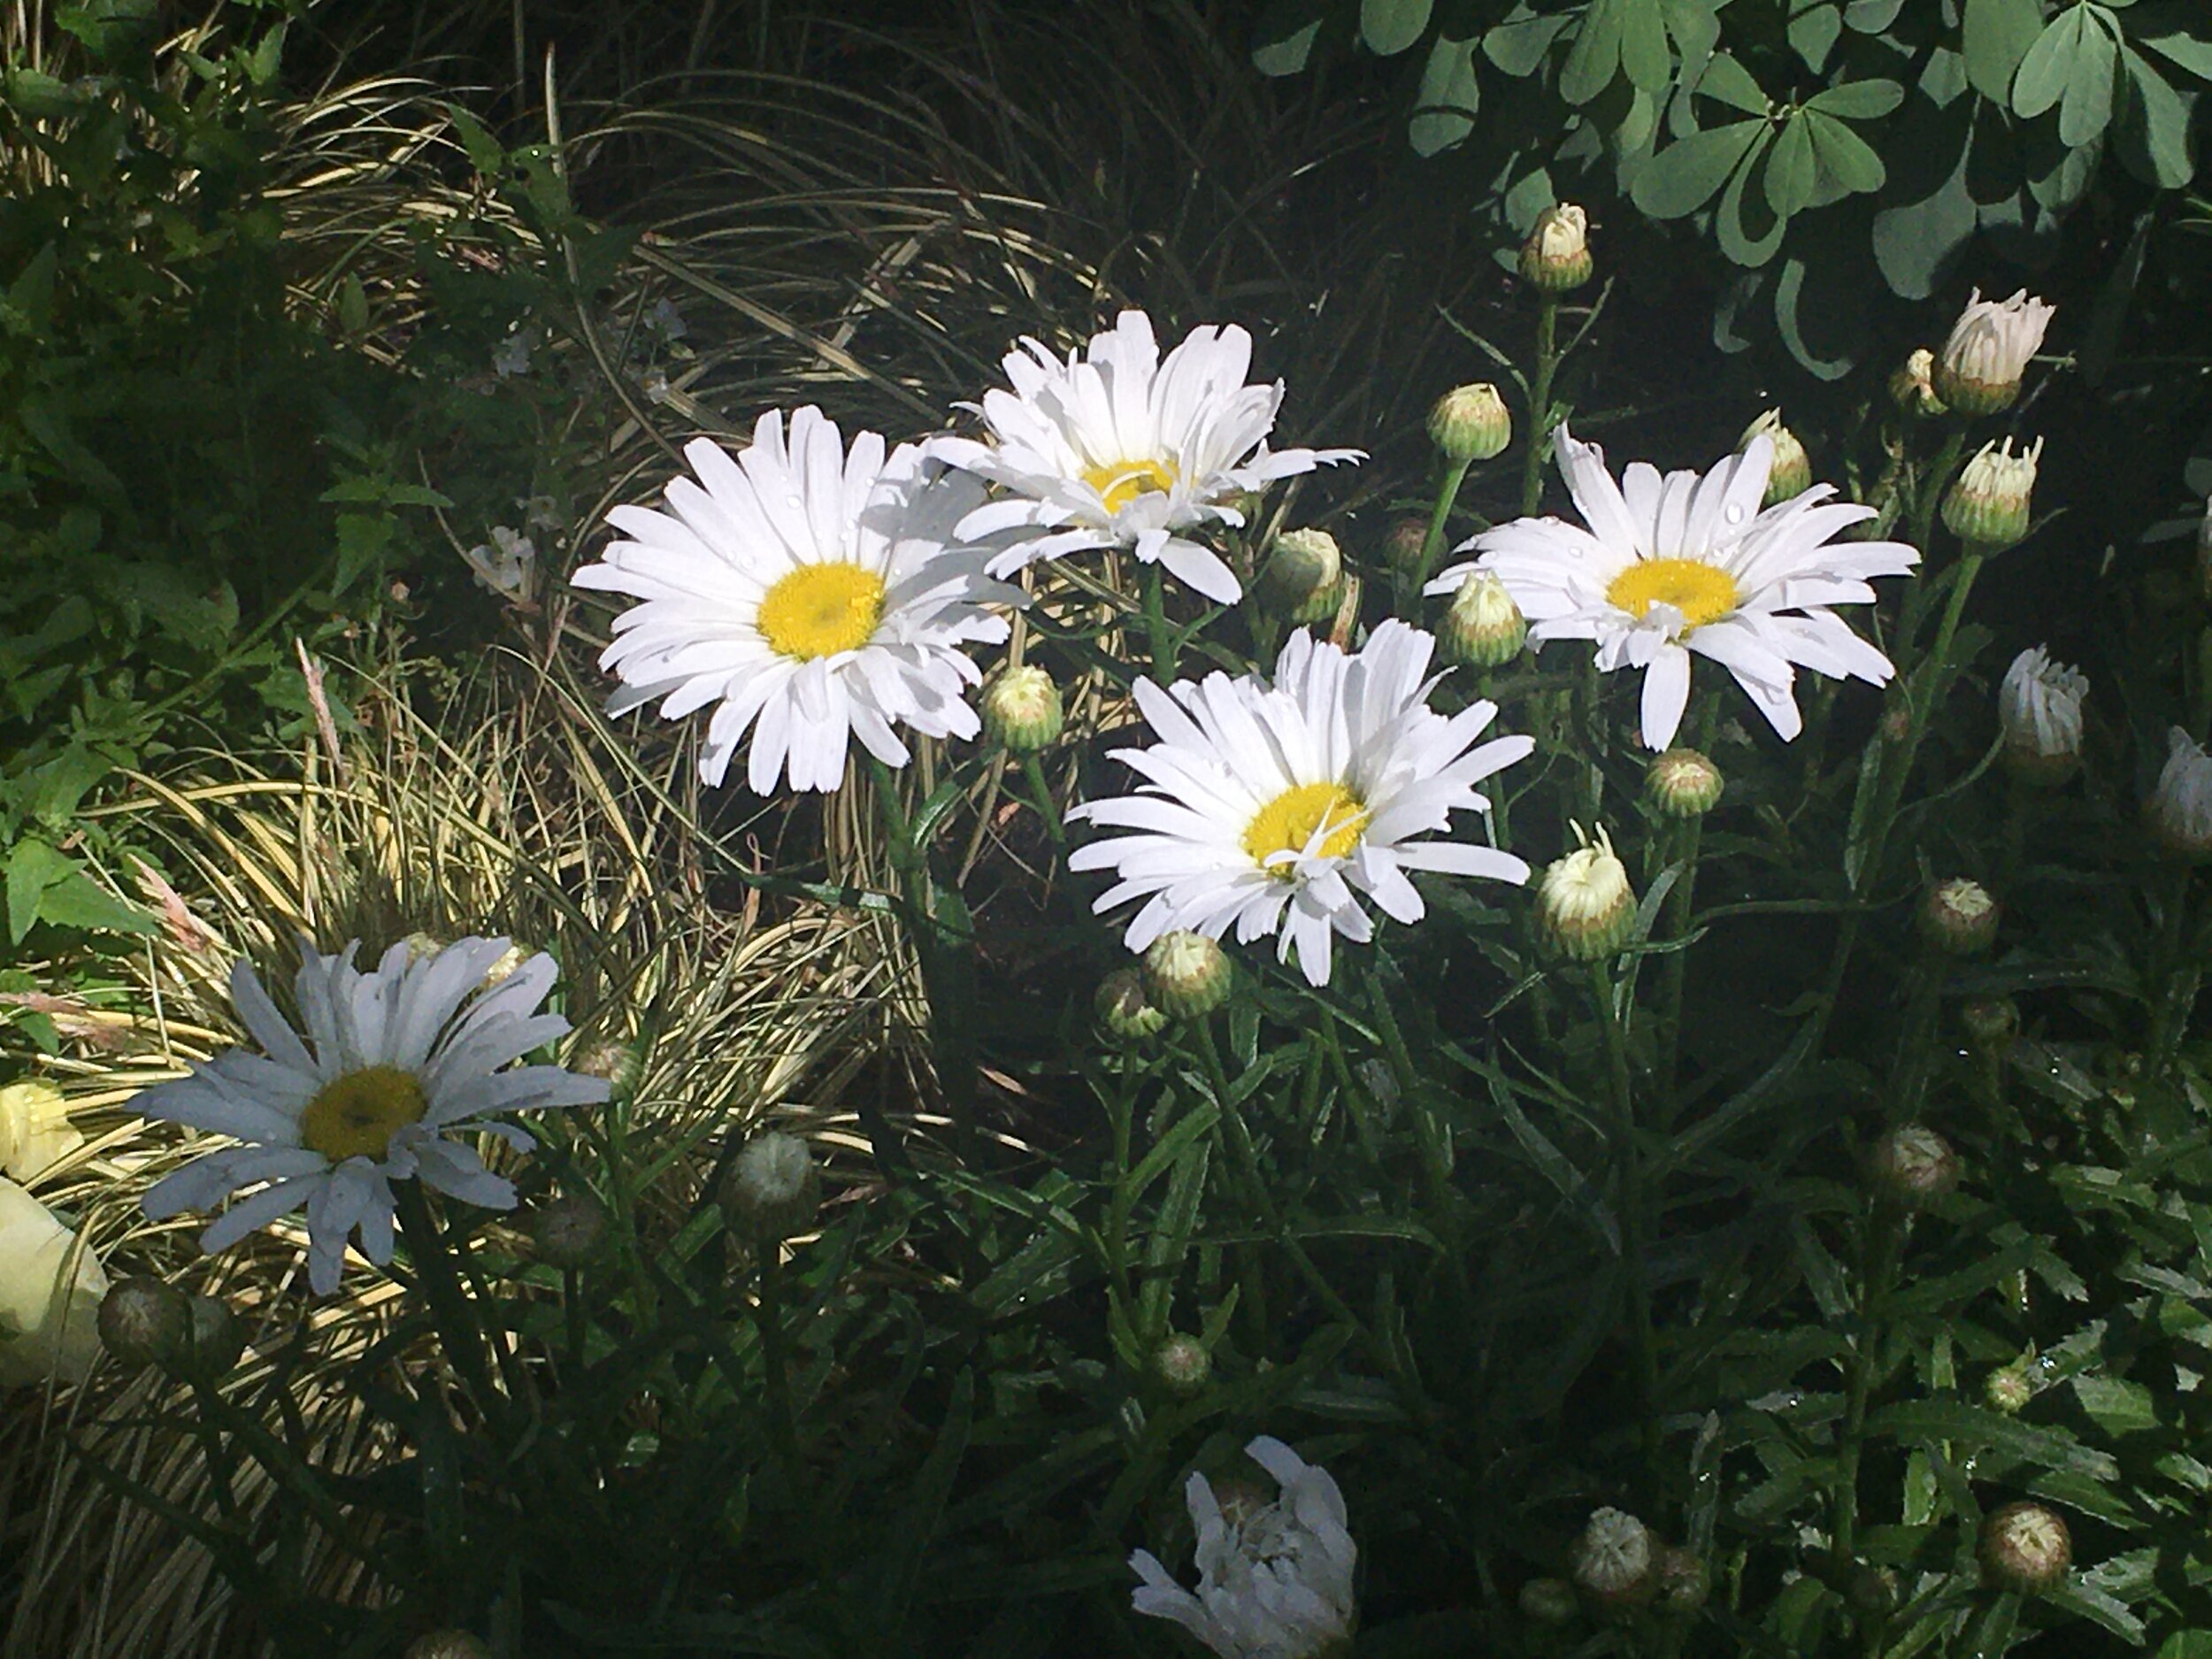  Basked in sunlight, these flowers are commonly known as the Shasta Daisy, which are native to mountains between France and Spain. 